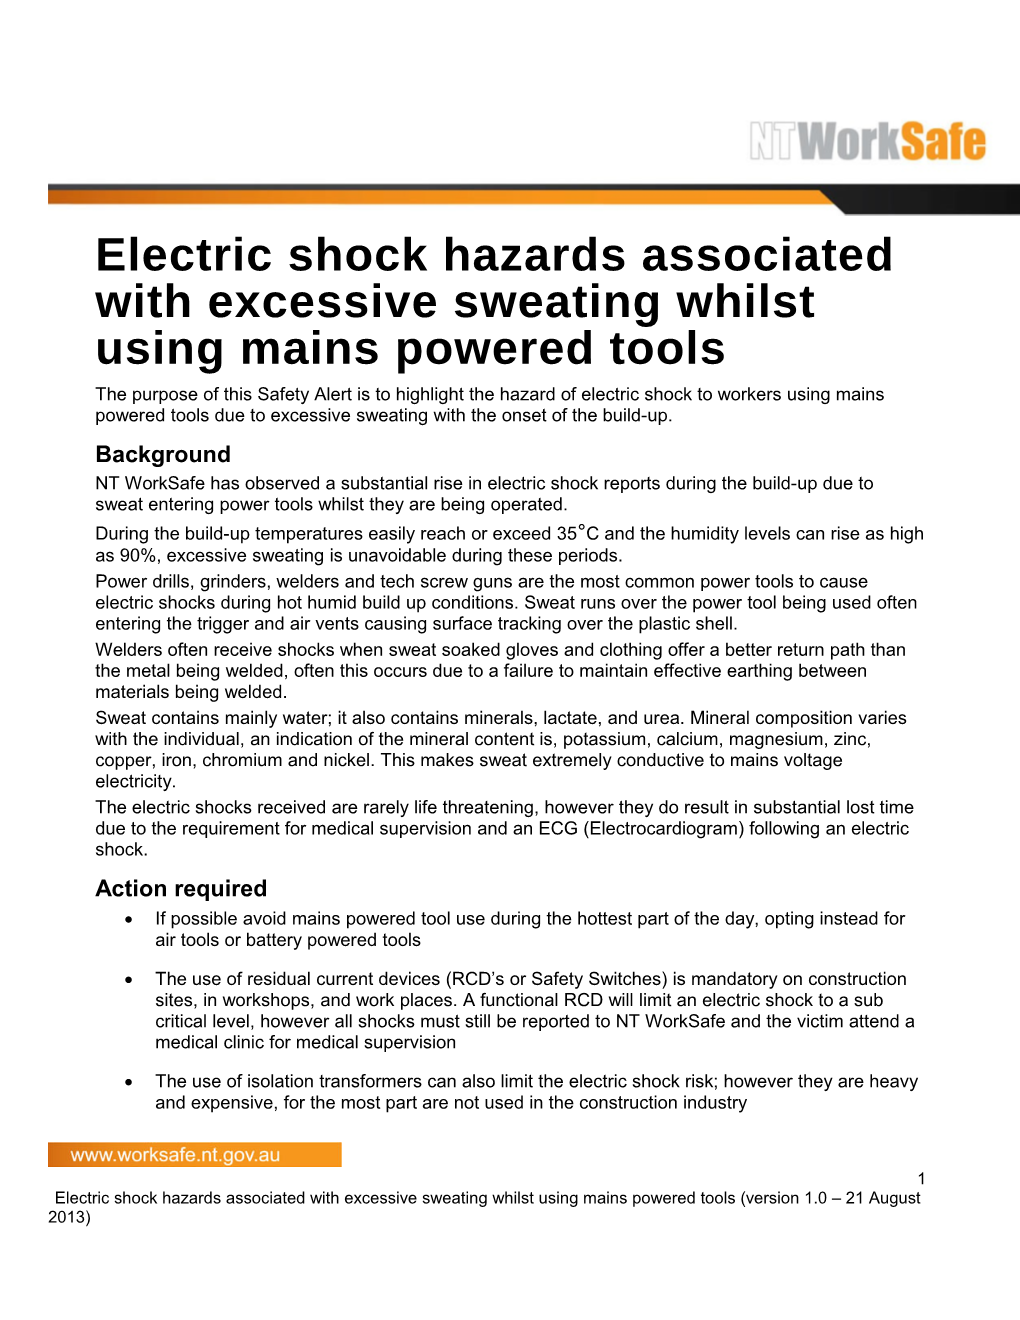 Safety Alert - Electric Shock Hazards Associated with Excessive Sweating Whilst Using Mains